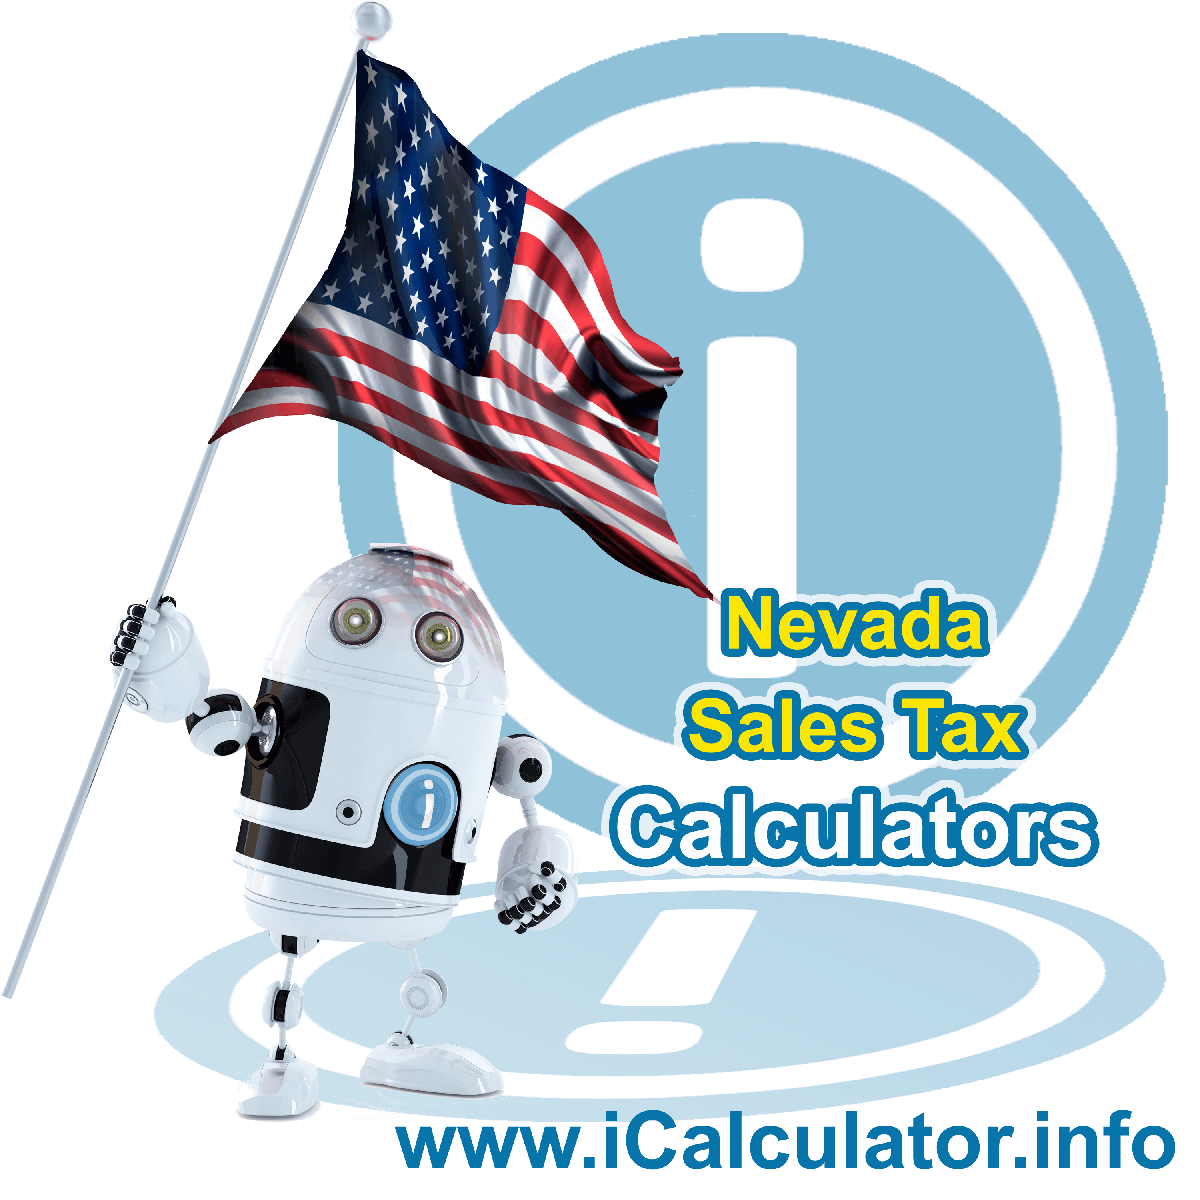 Clark County Sales Rates: This image illustrates a calculator robot calculating Clark County sales tax manually using the Clark County Sales Tax Formula. You can use this information to calculate Clark County Sales Tax manually or use the Clark County Sales Tax Calculator to calculate sales tax online.